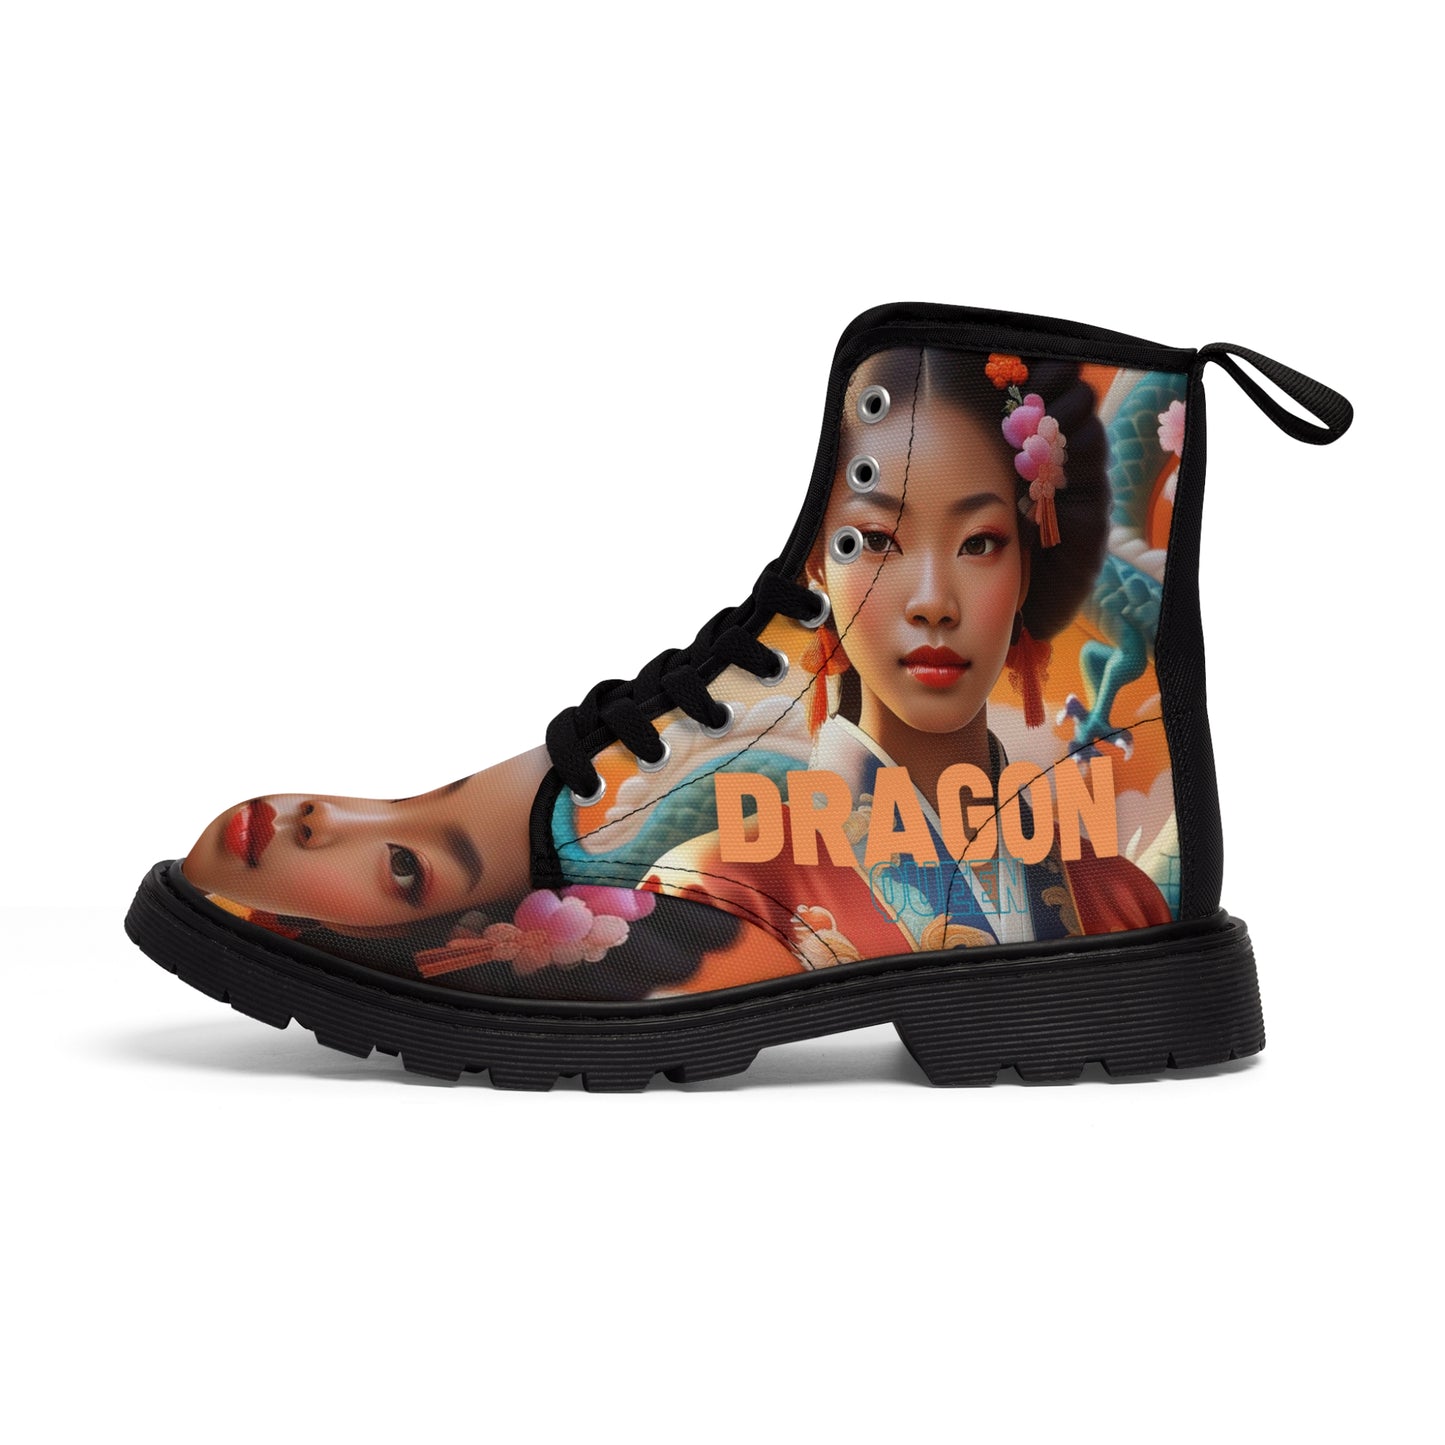 Women's "Muse Collection" Canvas Boots